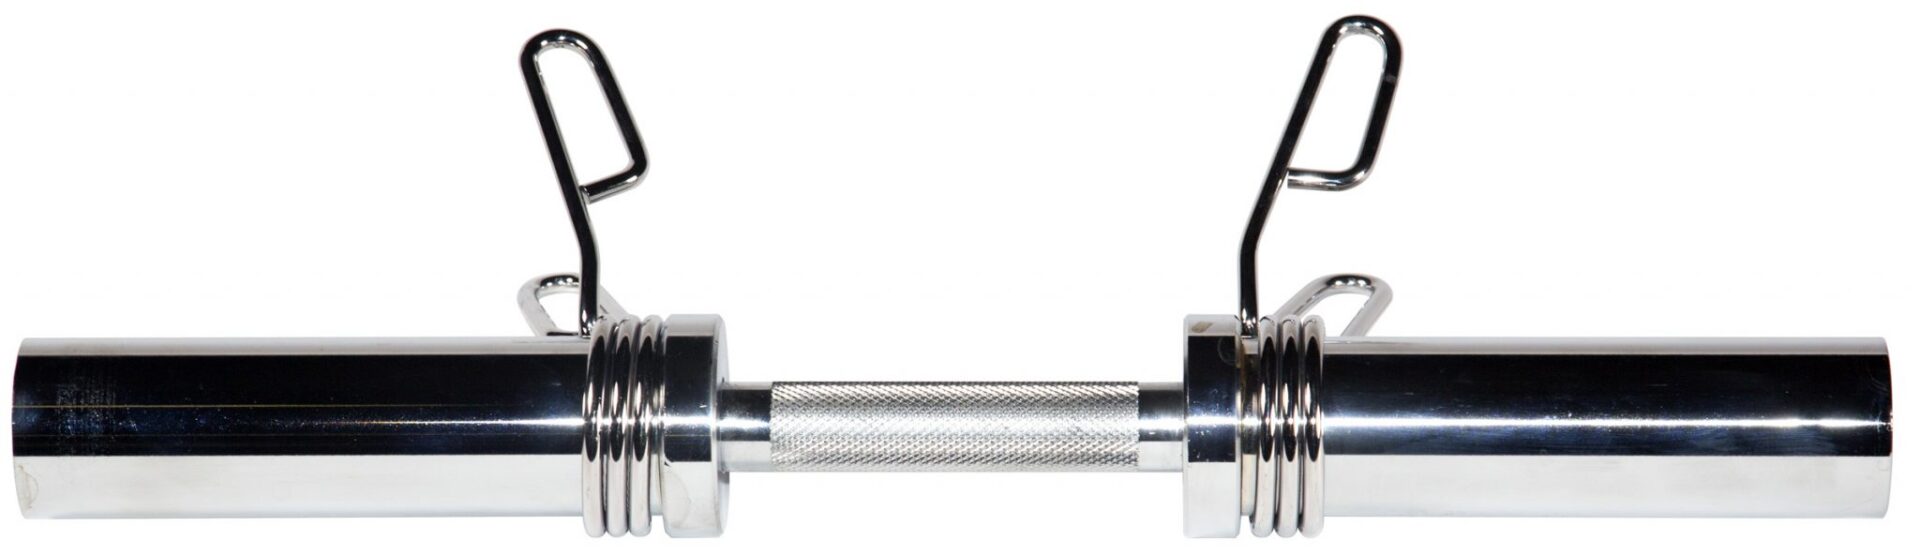 20 Olympic Dumbbell Handle w Spring Clip Collars